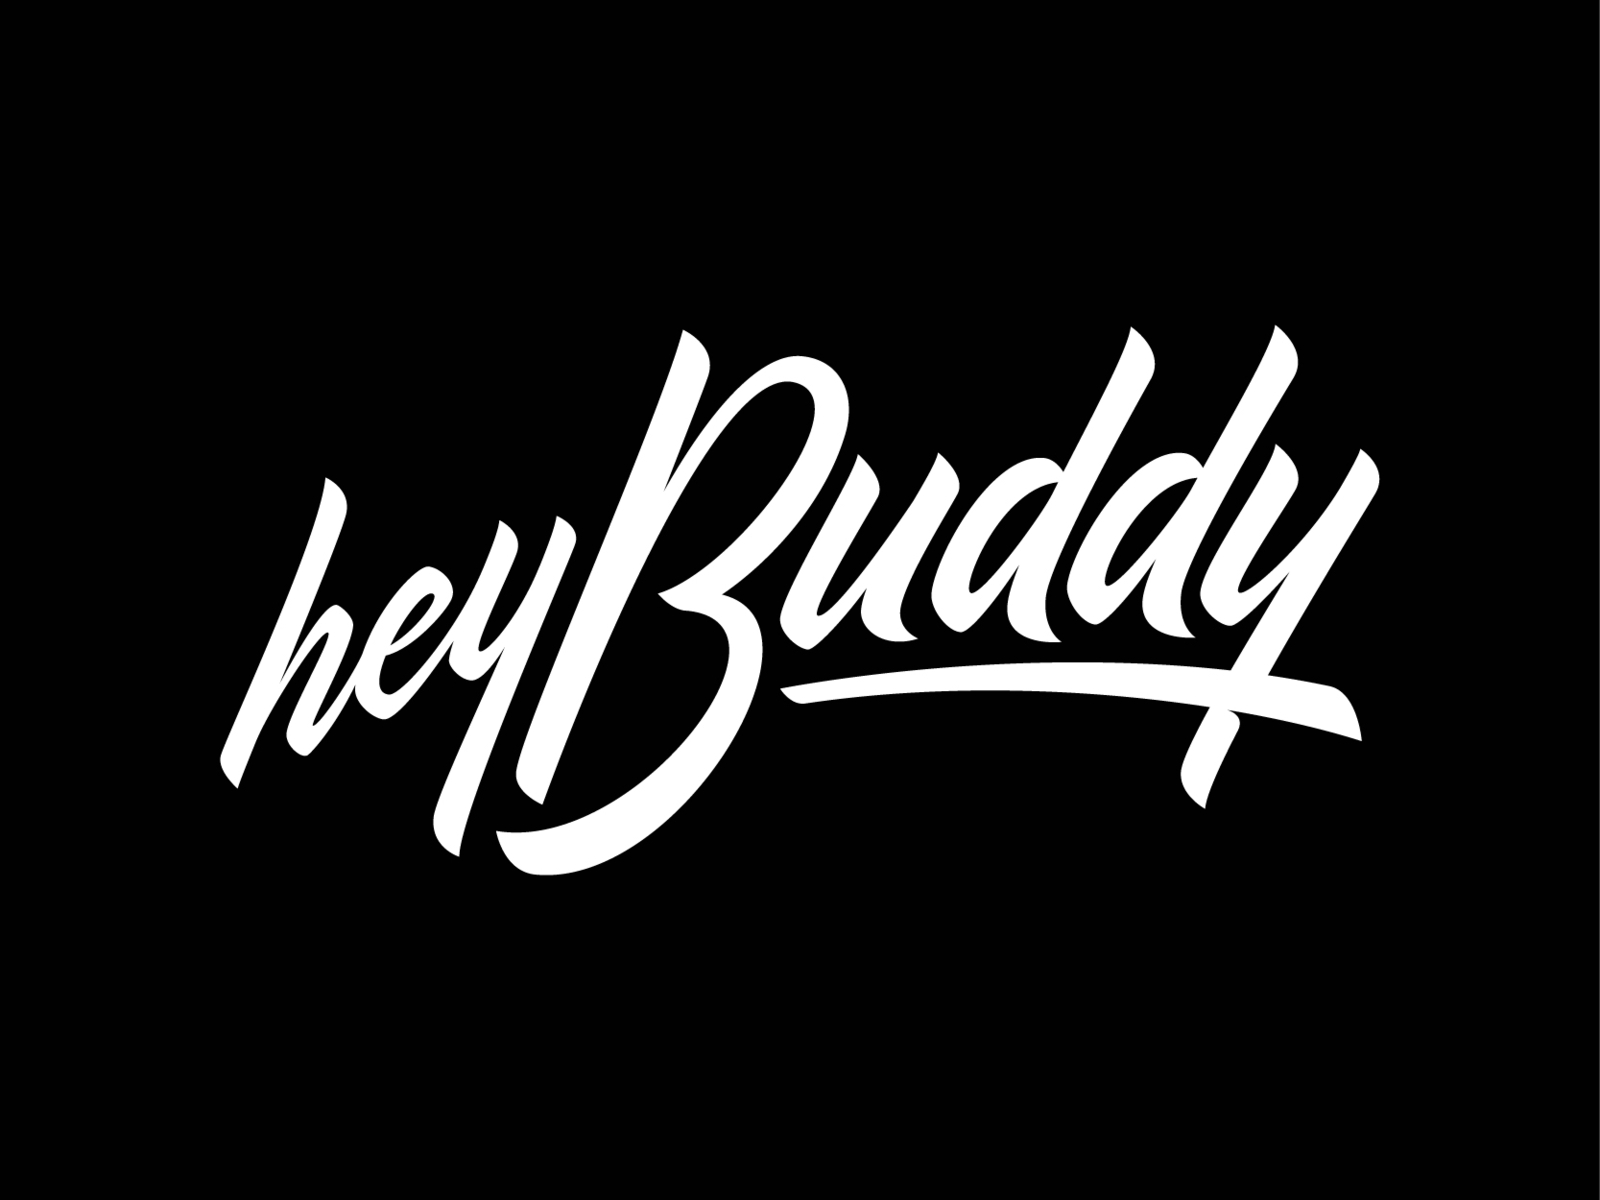 Hey Buddy Logotype By Hiep Tong On Dribbble